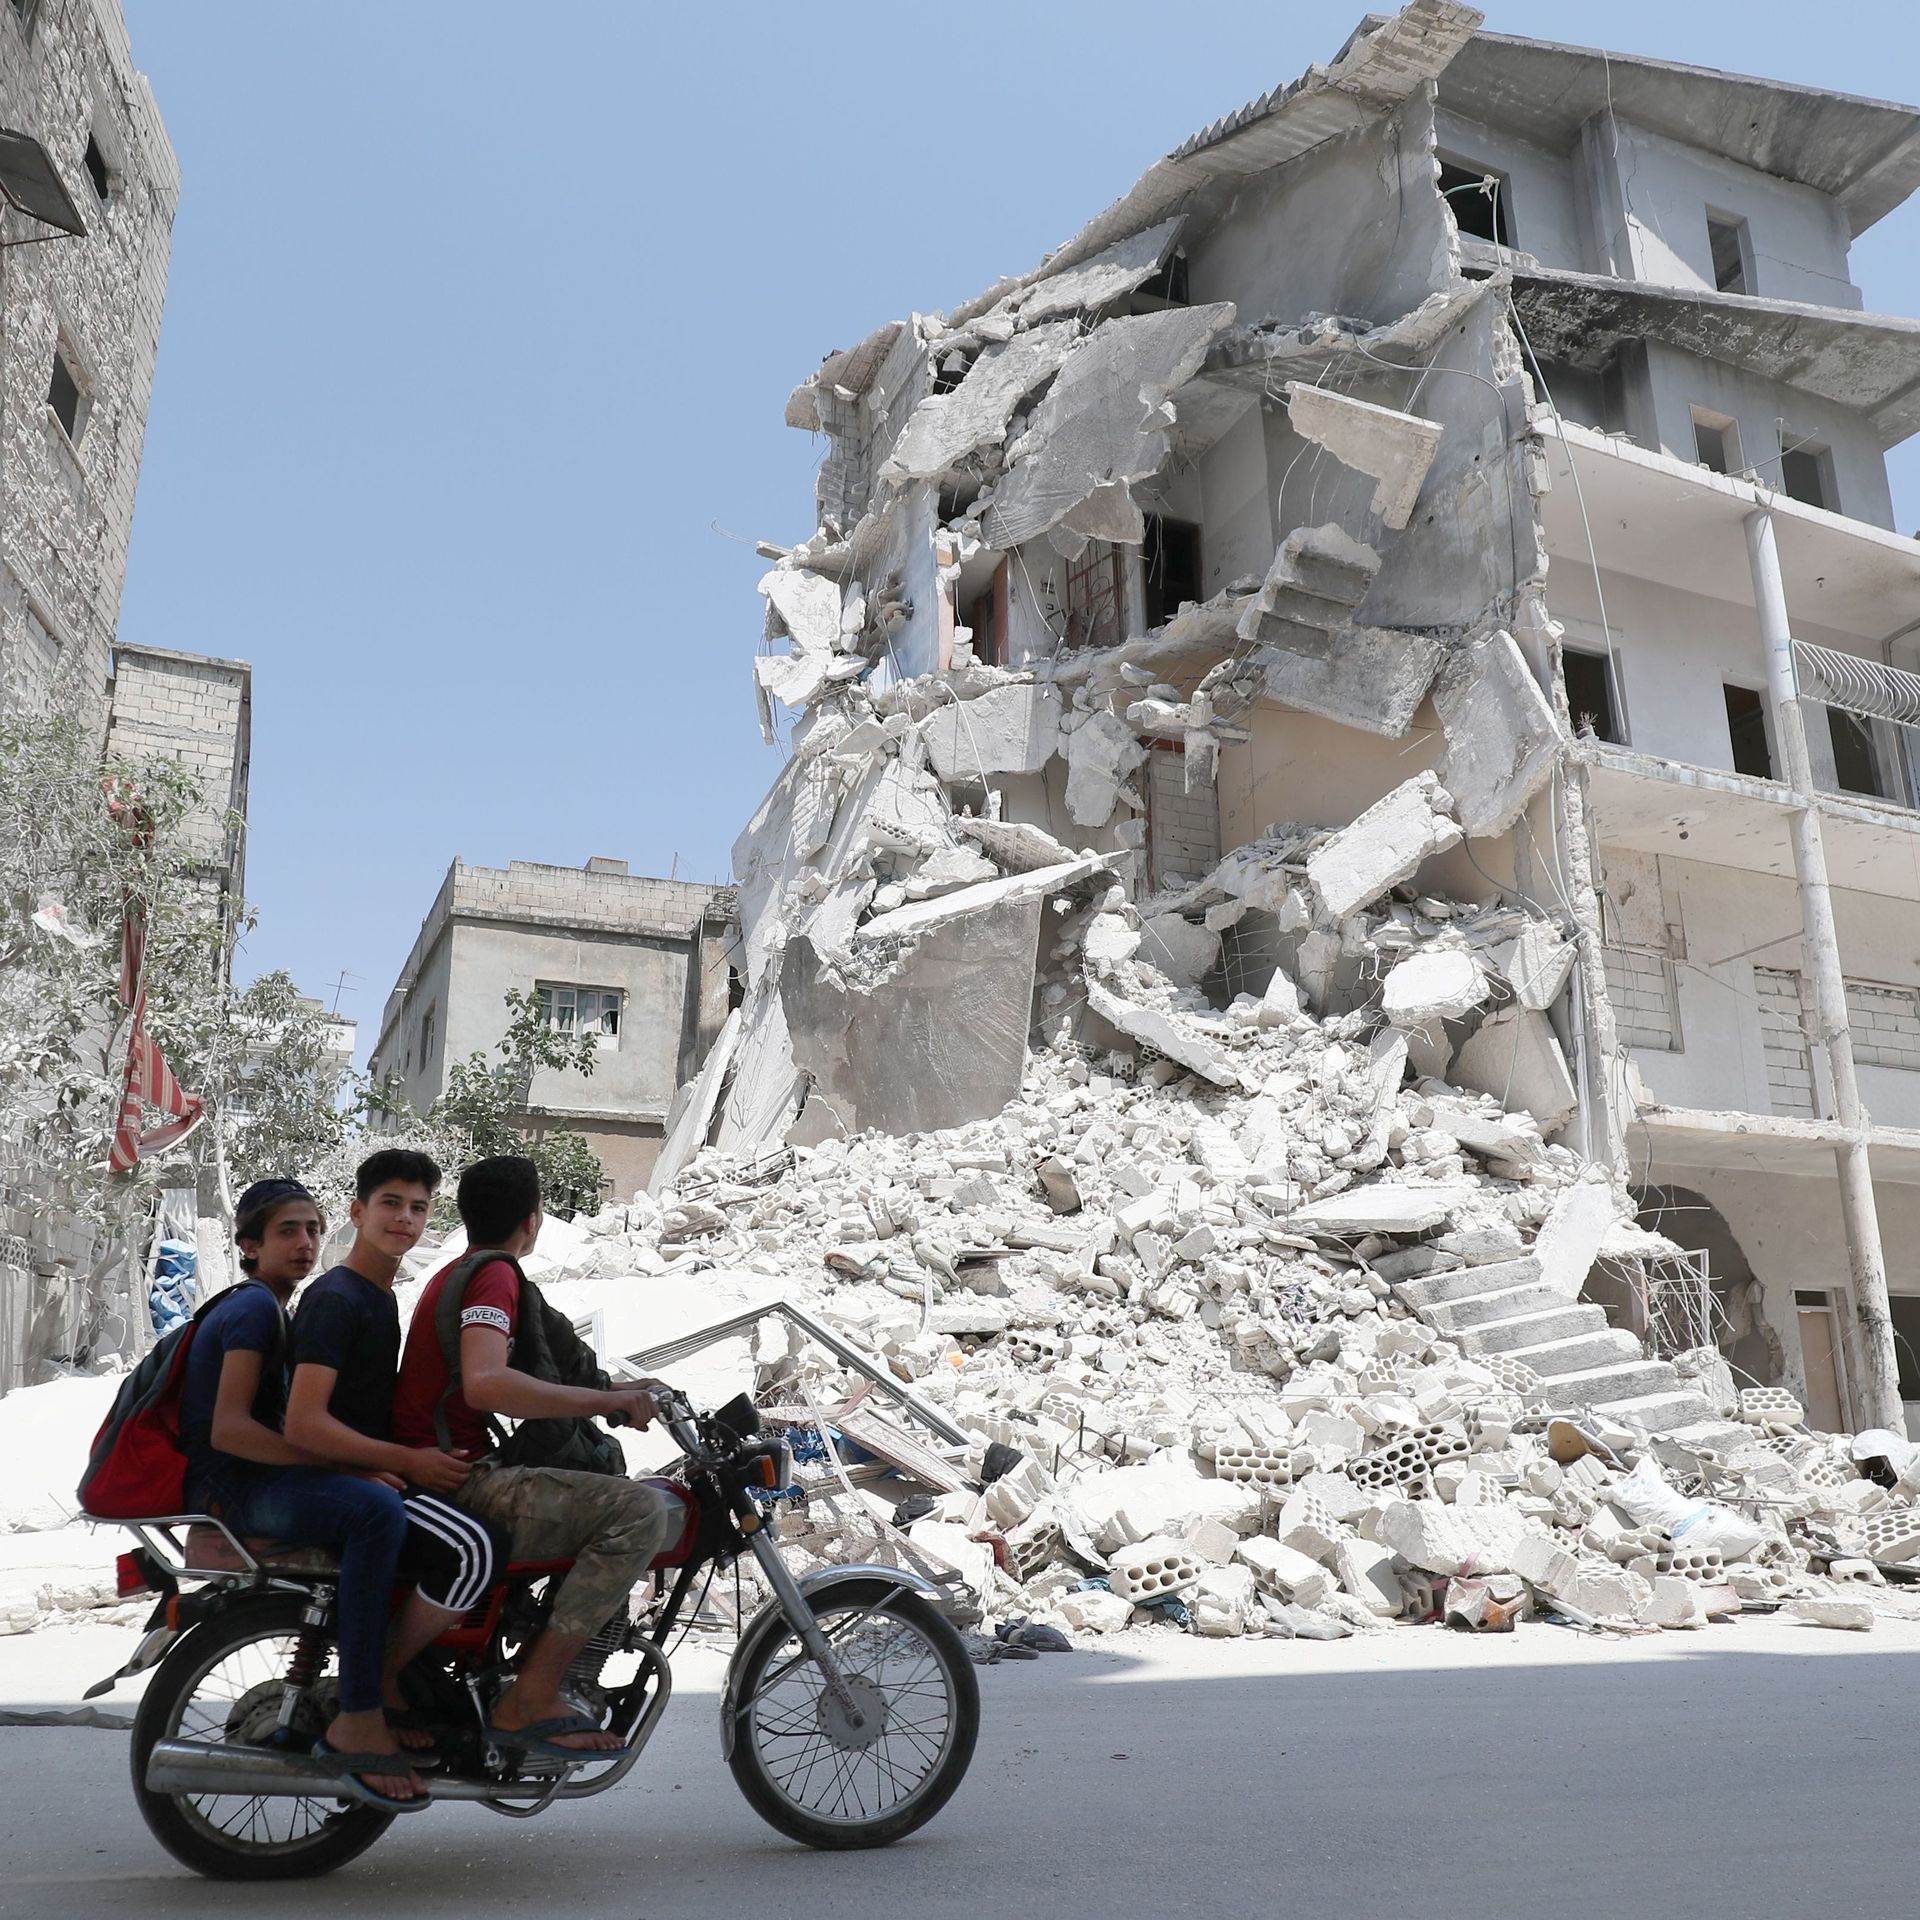 Men on a motorcycle ride by an airstrike-damaged building